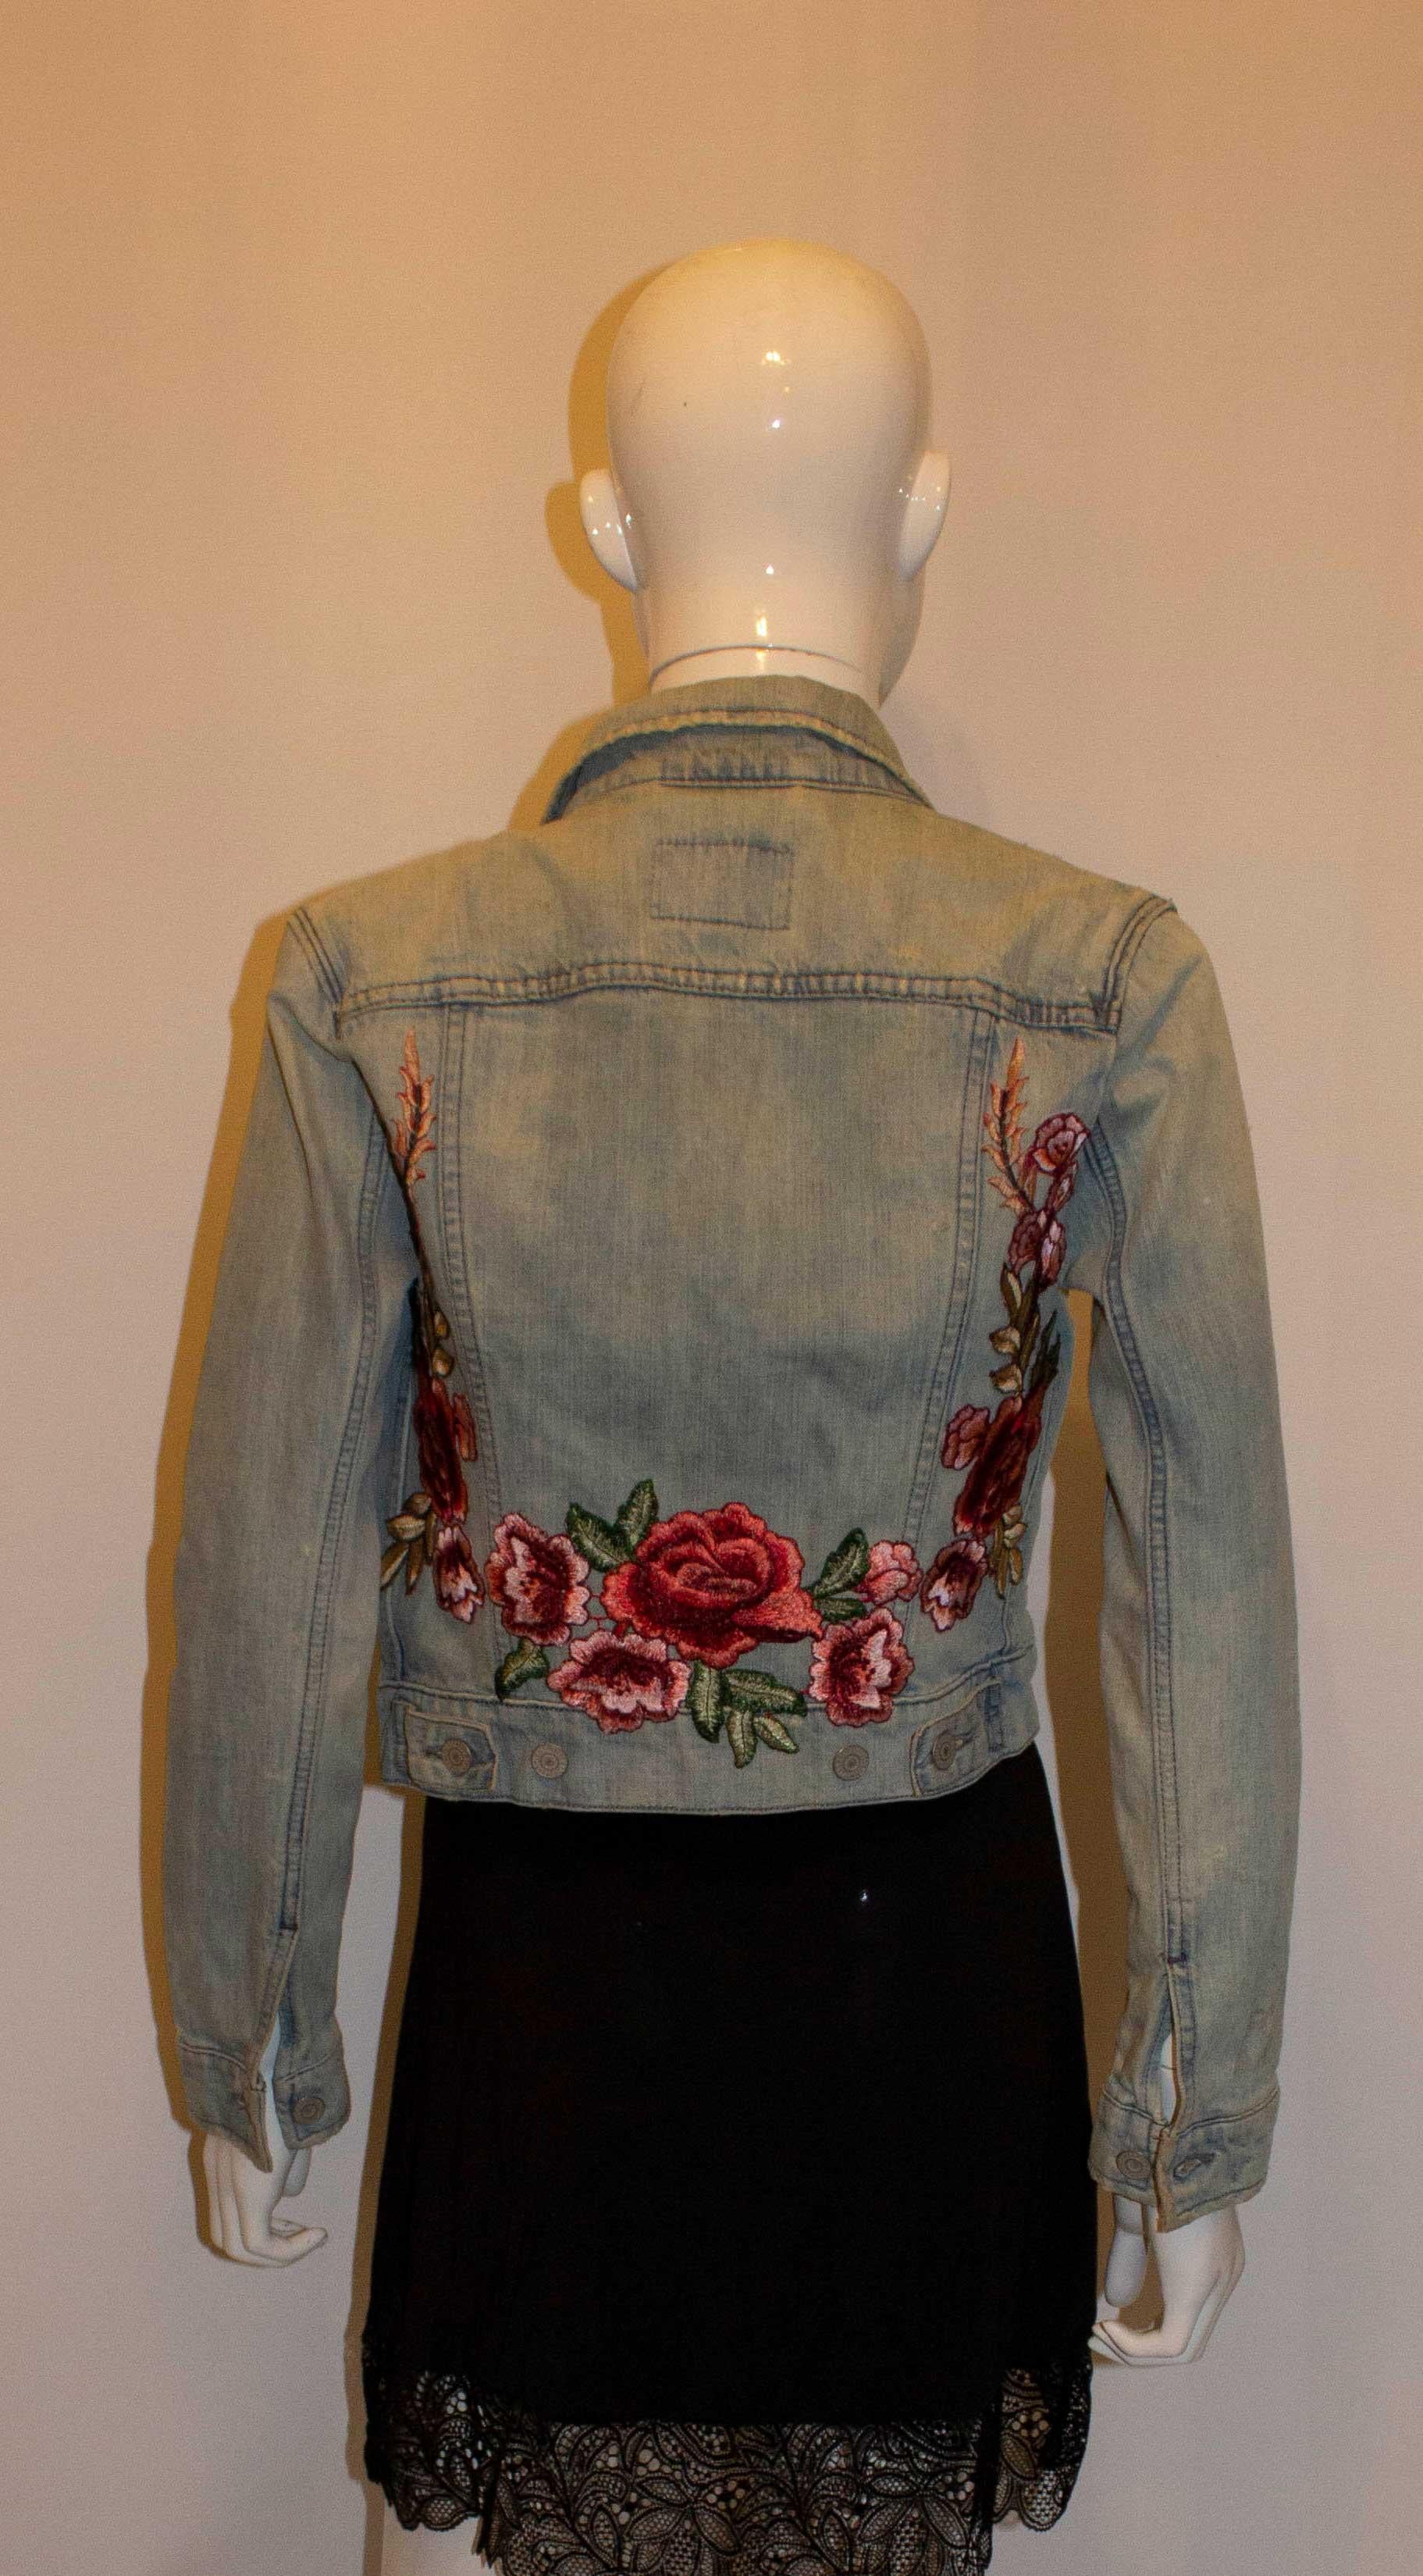 A headturning vintage  denim jacket by Levis. The jacket has a button front and cuffs, with wonderful red and pink floral embroidery on the back. It has two patch pockets at breast leval and two pockets at the front at lower leval.
Size P /S